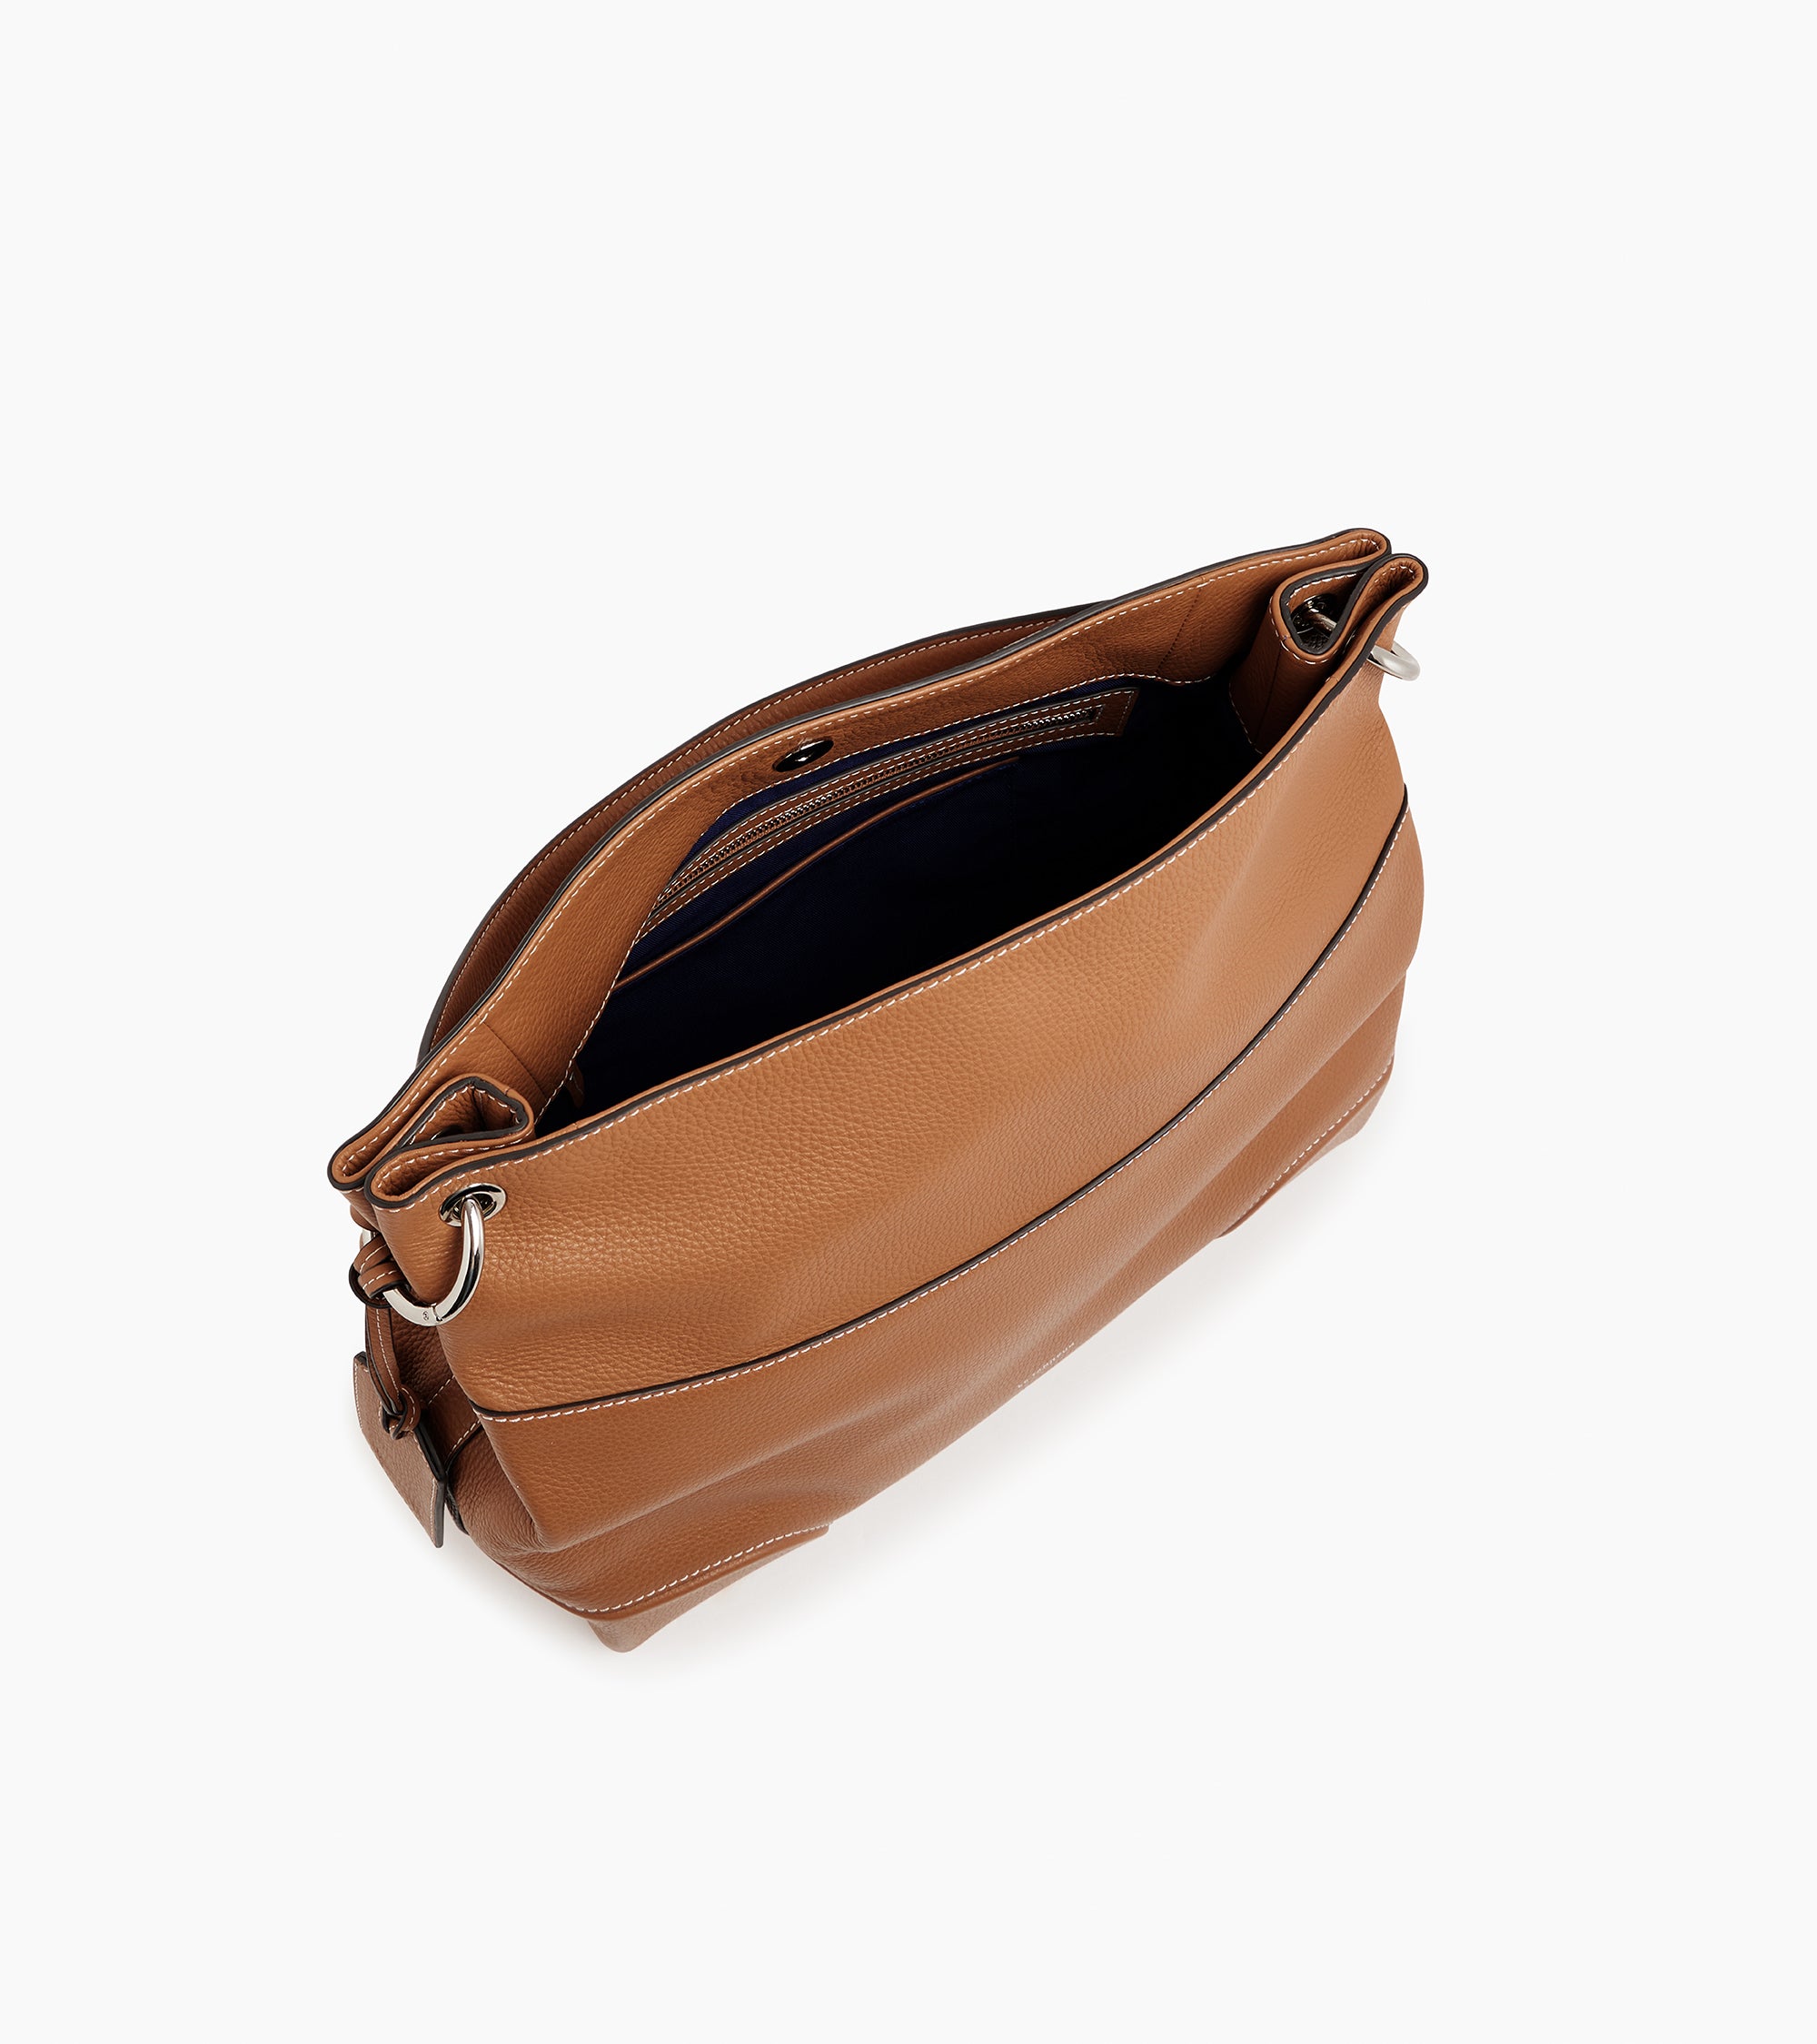 Romy large hobo bag in grained leather